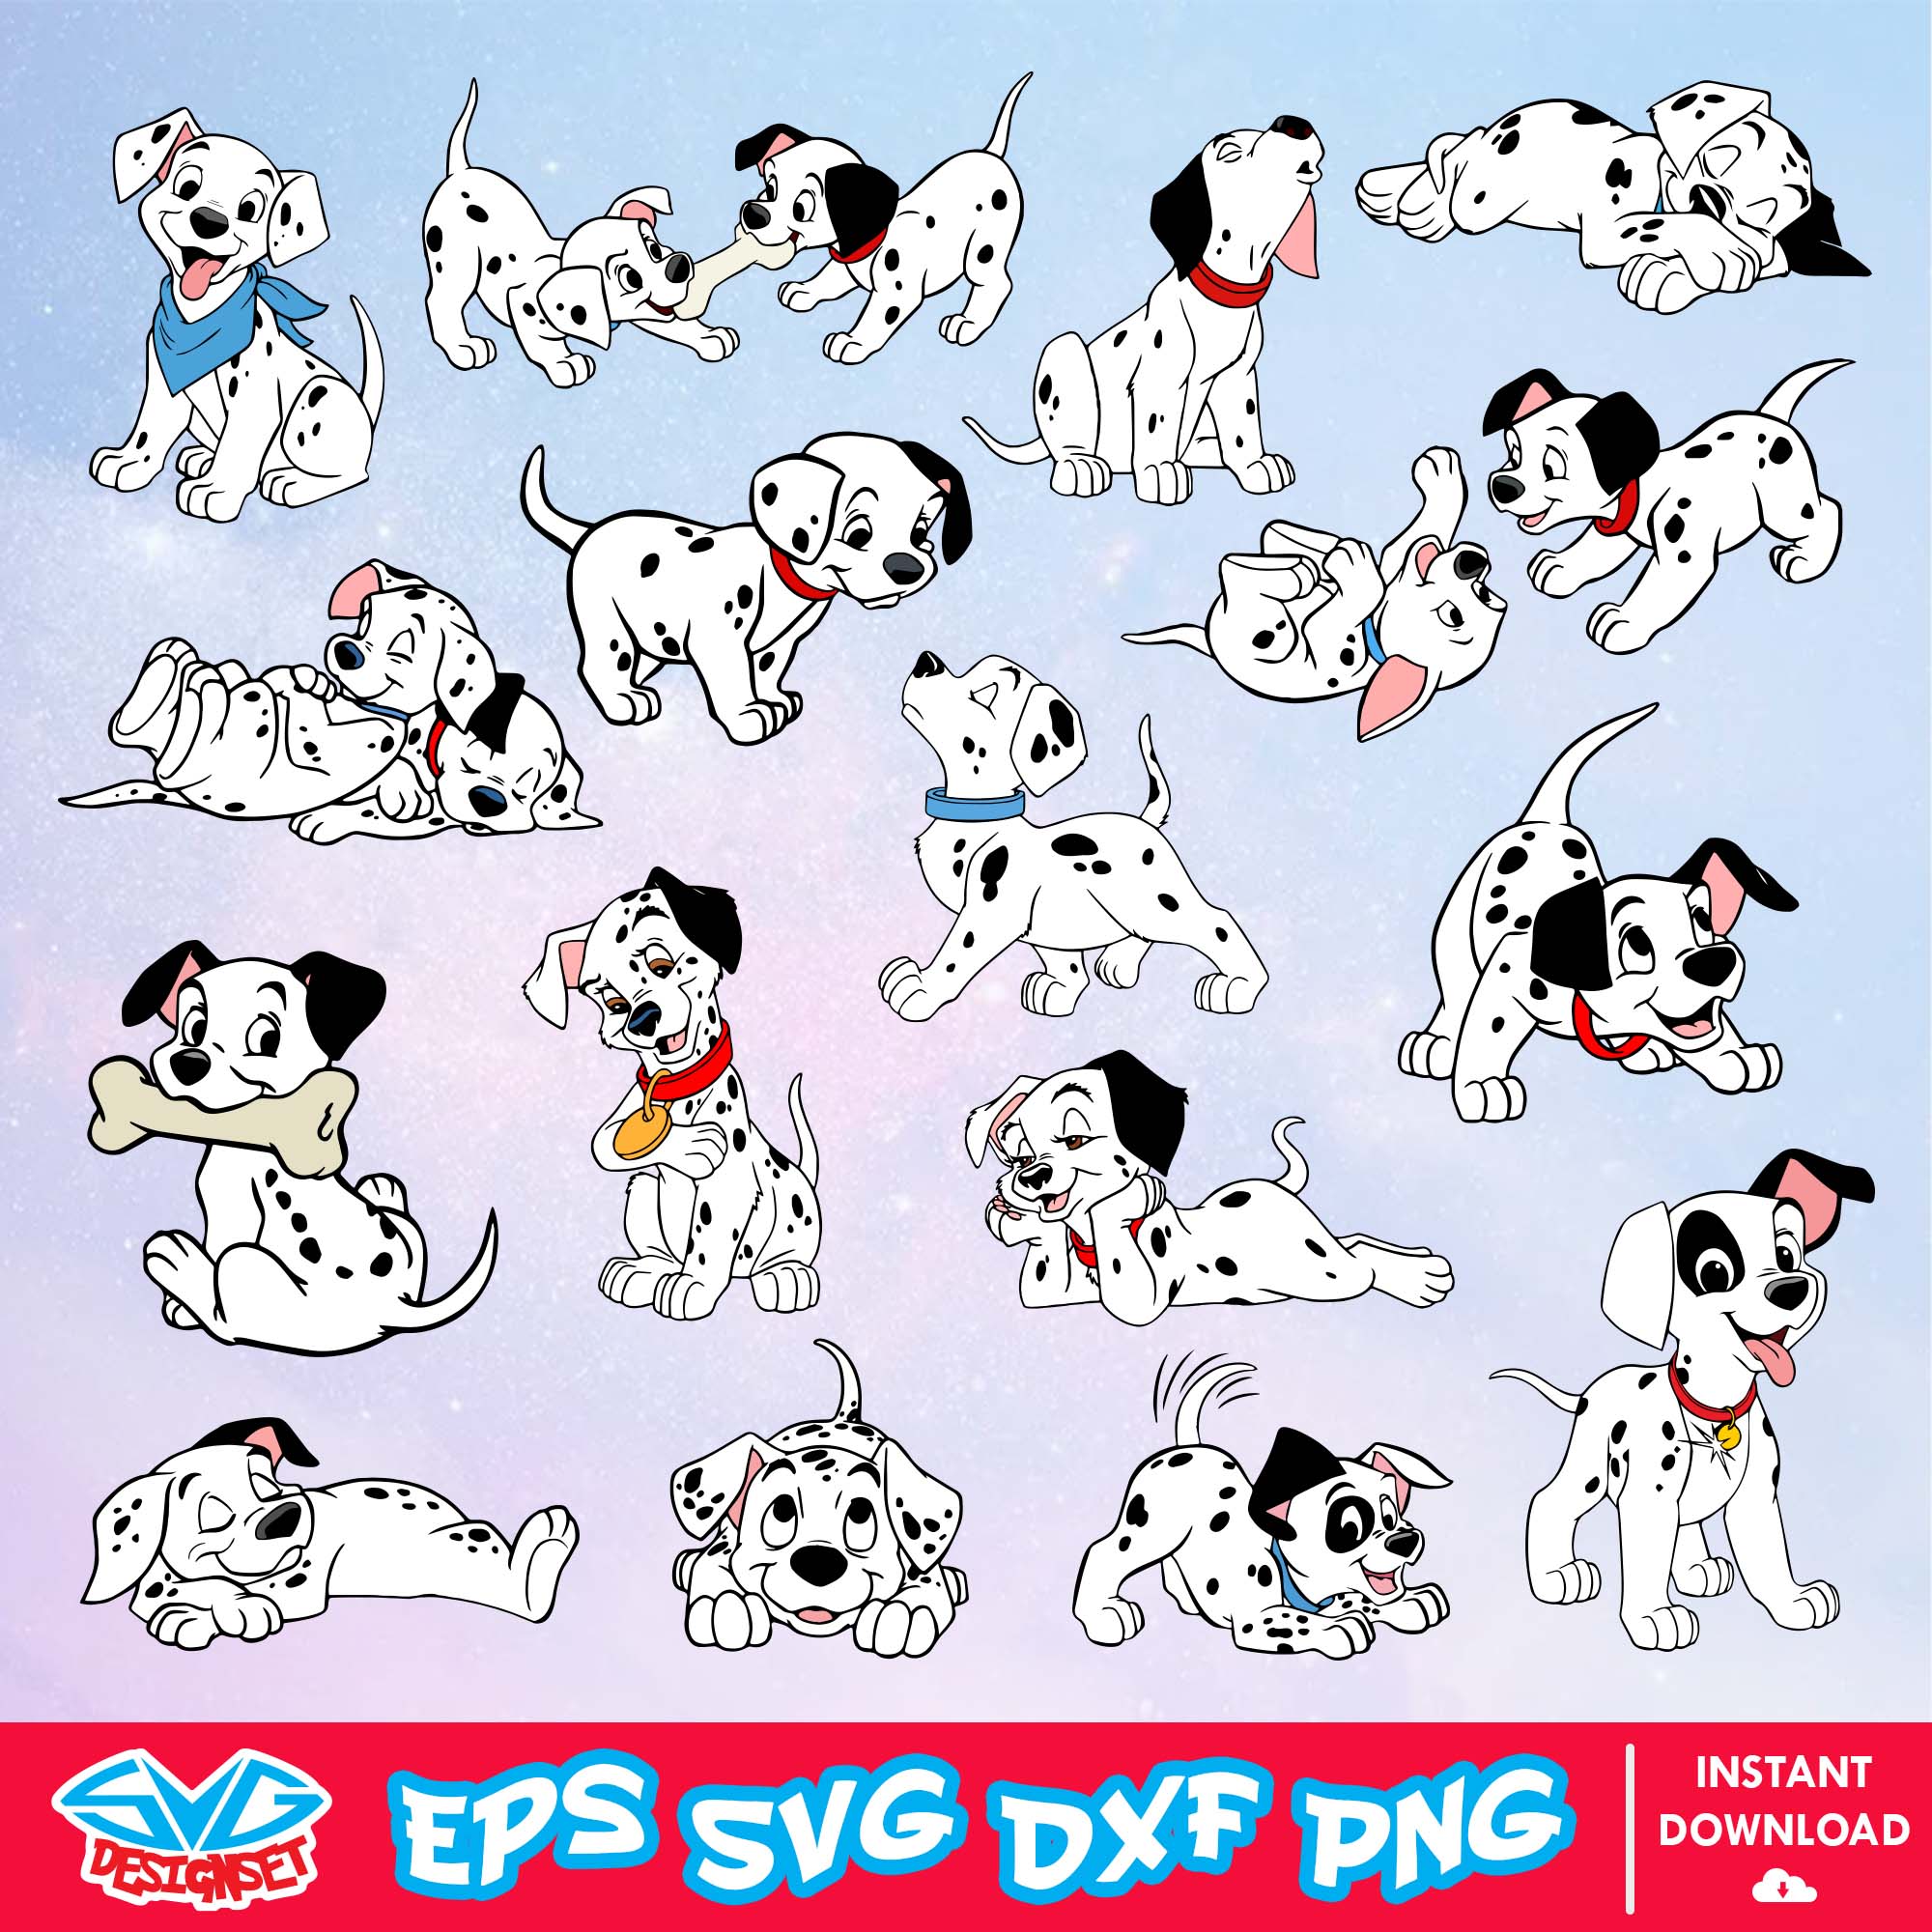 101 Dalmatians Svg, Dxf, Eps, Png, Clipart, Silhouette, and Cut files for Cricut , Silhouette Cameo 1 - SVGDesignSet